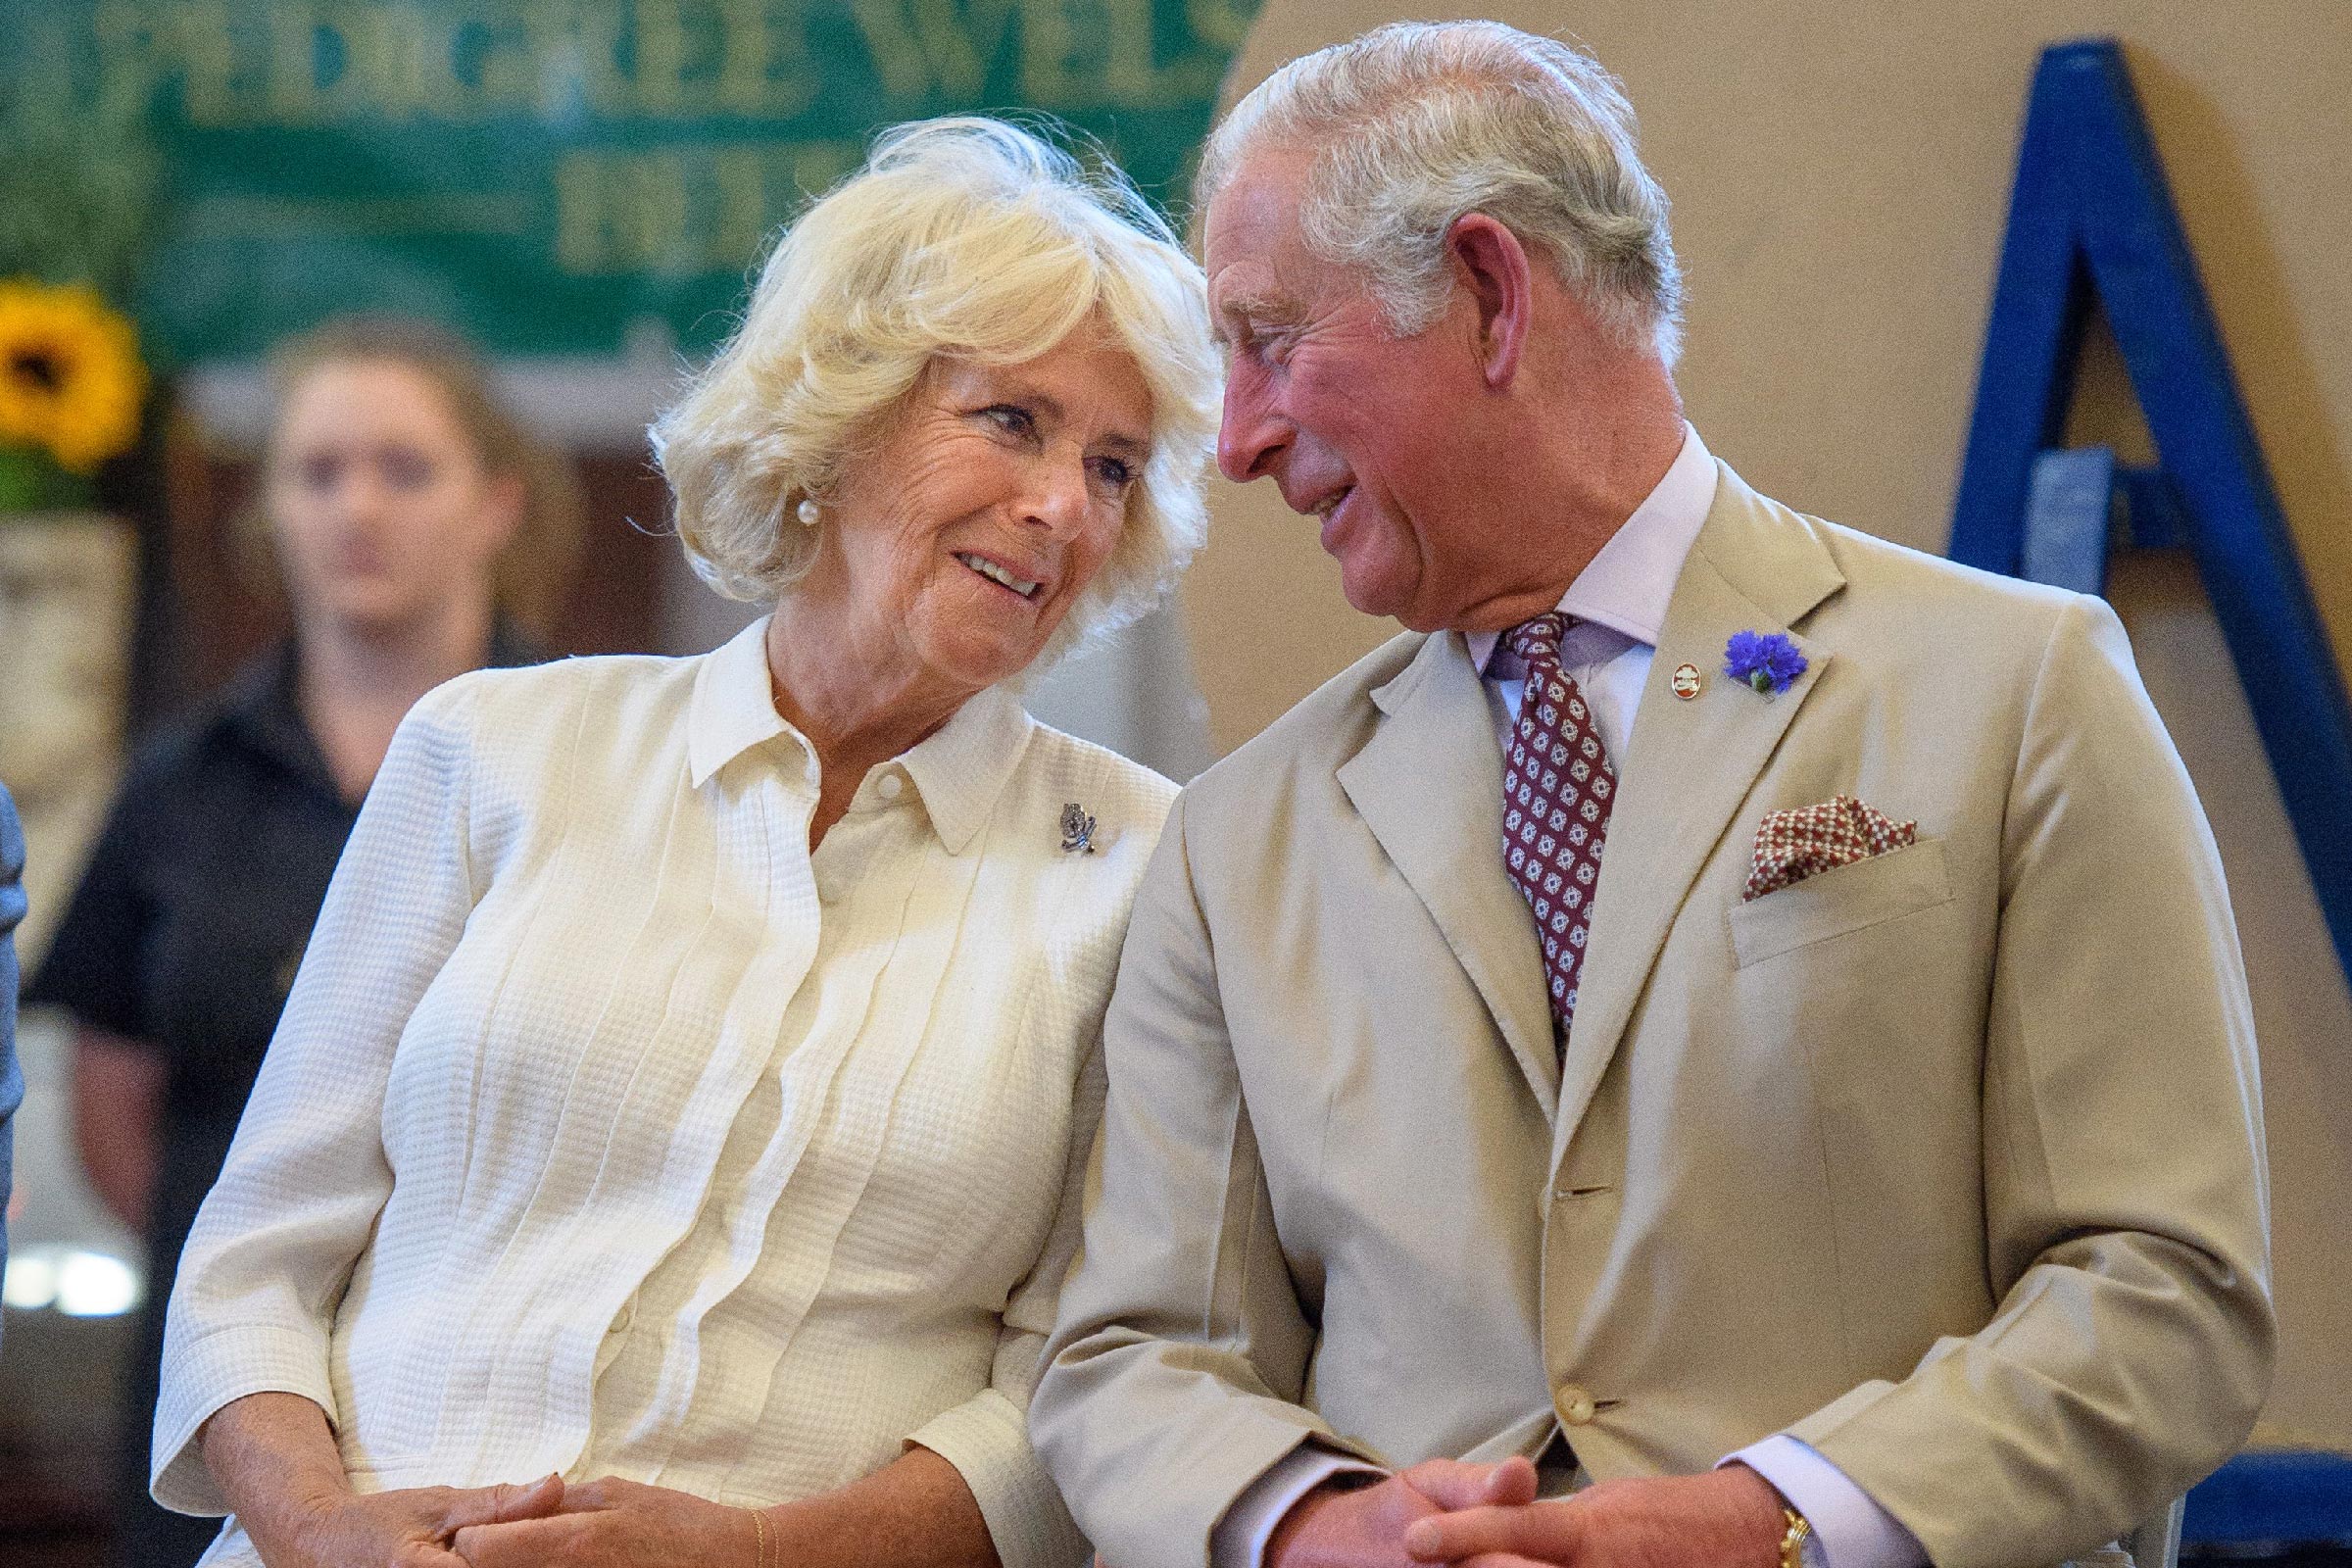 Apparently the Queen Mother APPROVED of Charles and Camilla’s affair, on one condition